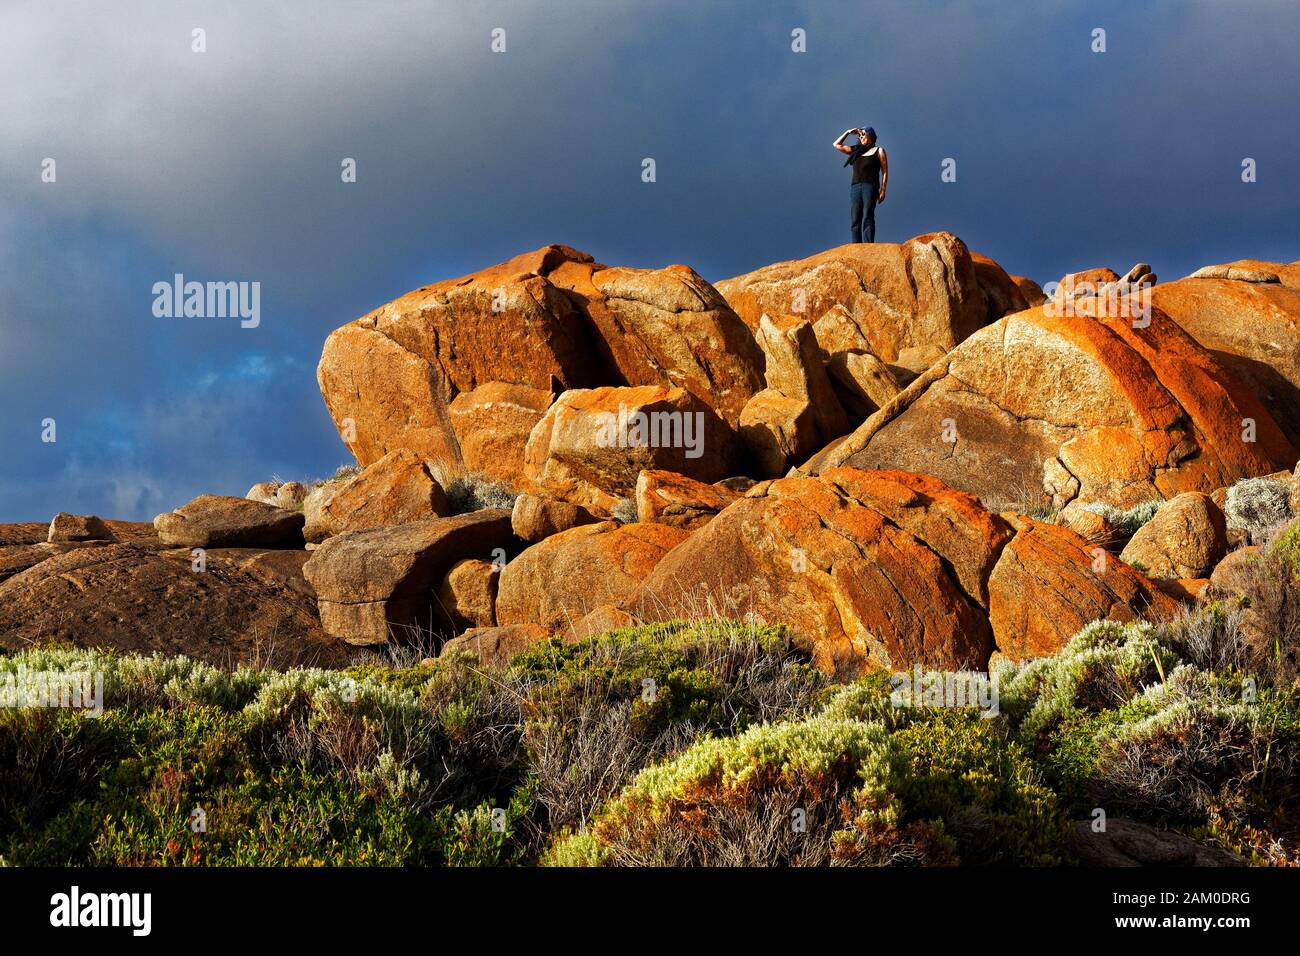 Woman overlooking Landscape from Granite stone formations, Augusta, Western Australia Stock Photo